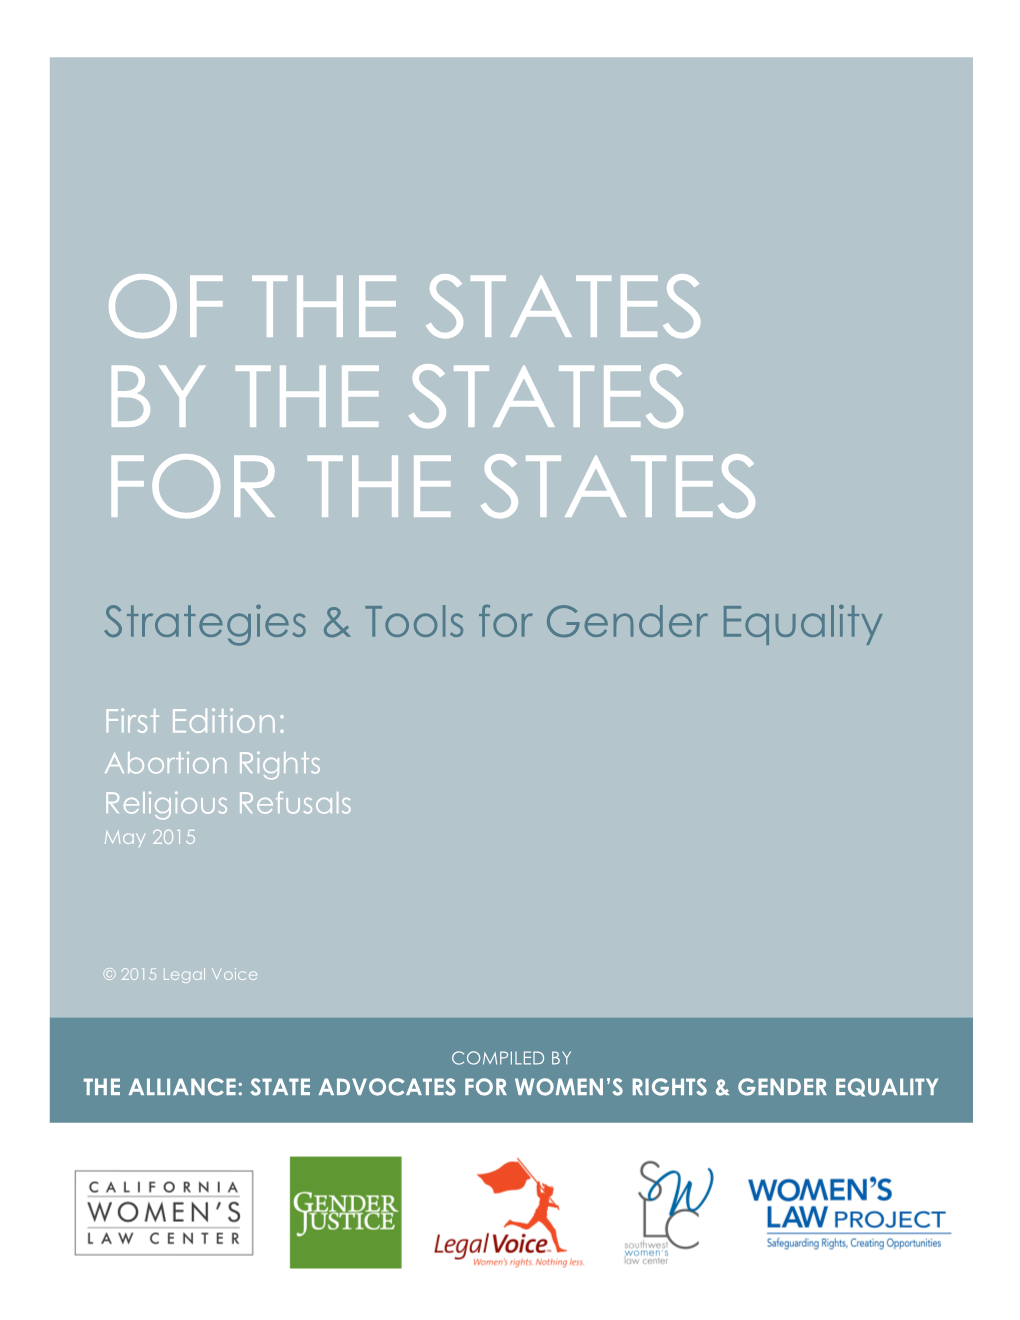 Strategies & Tools for Gender Equality